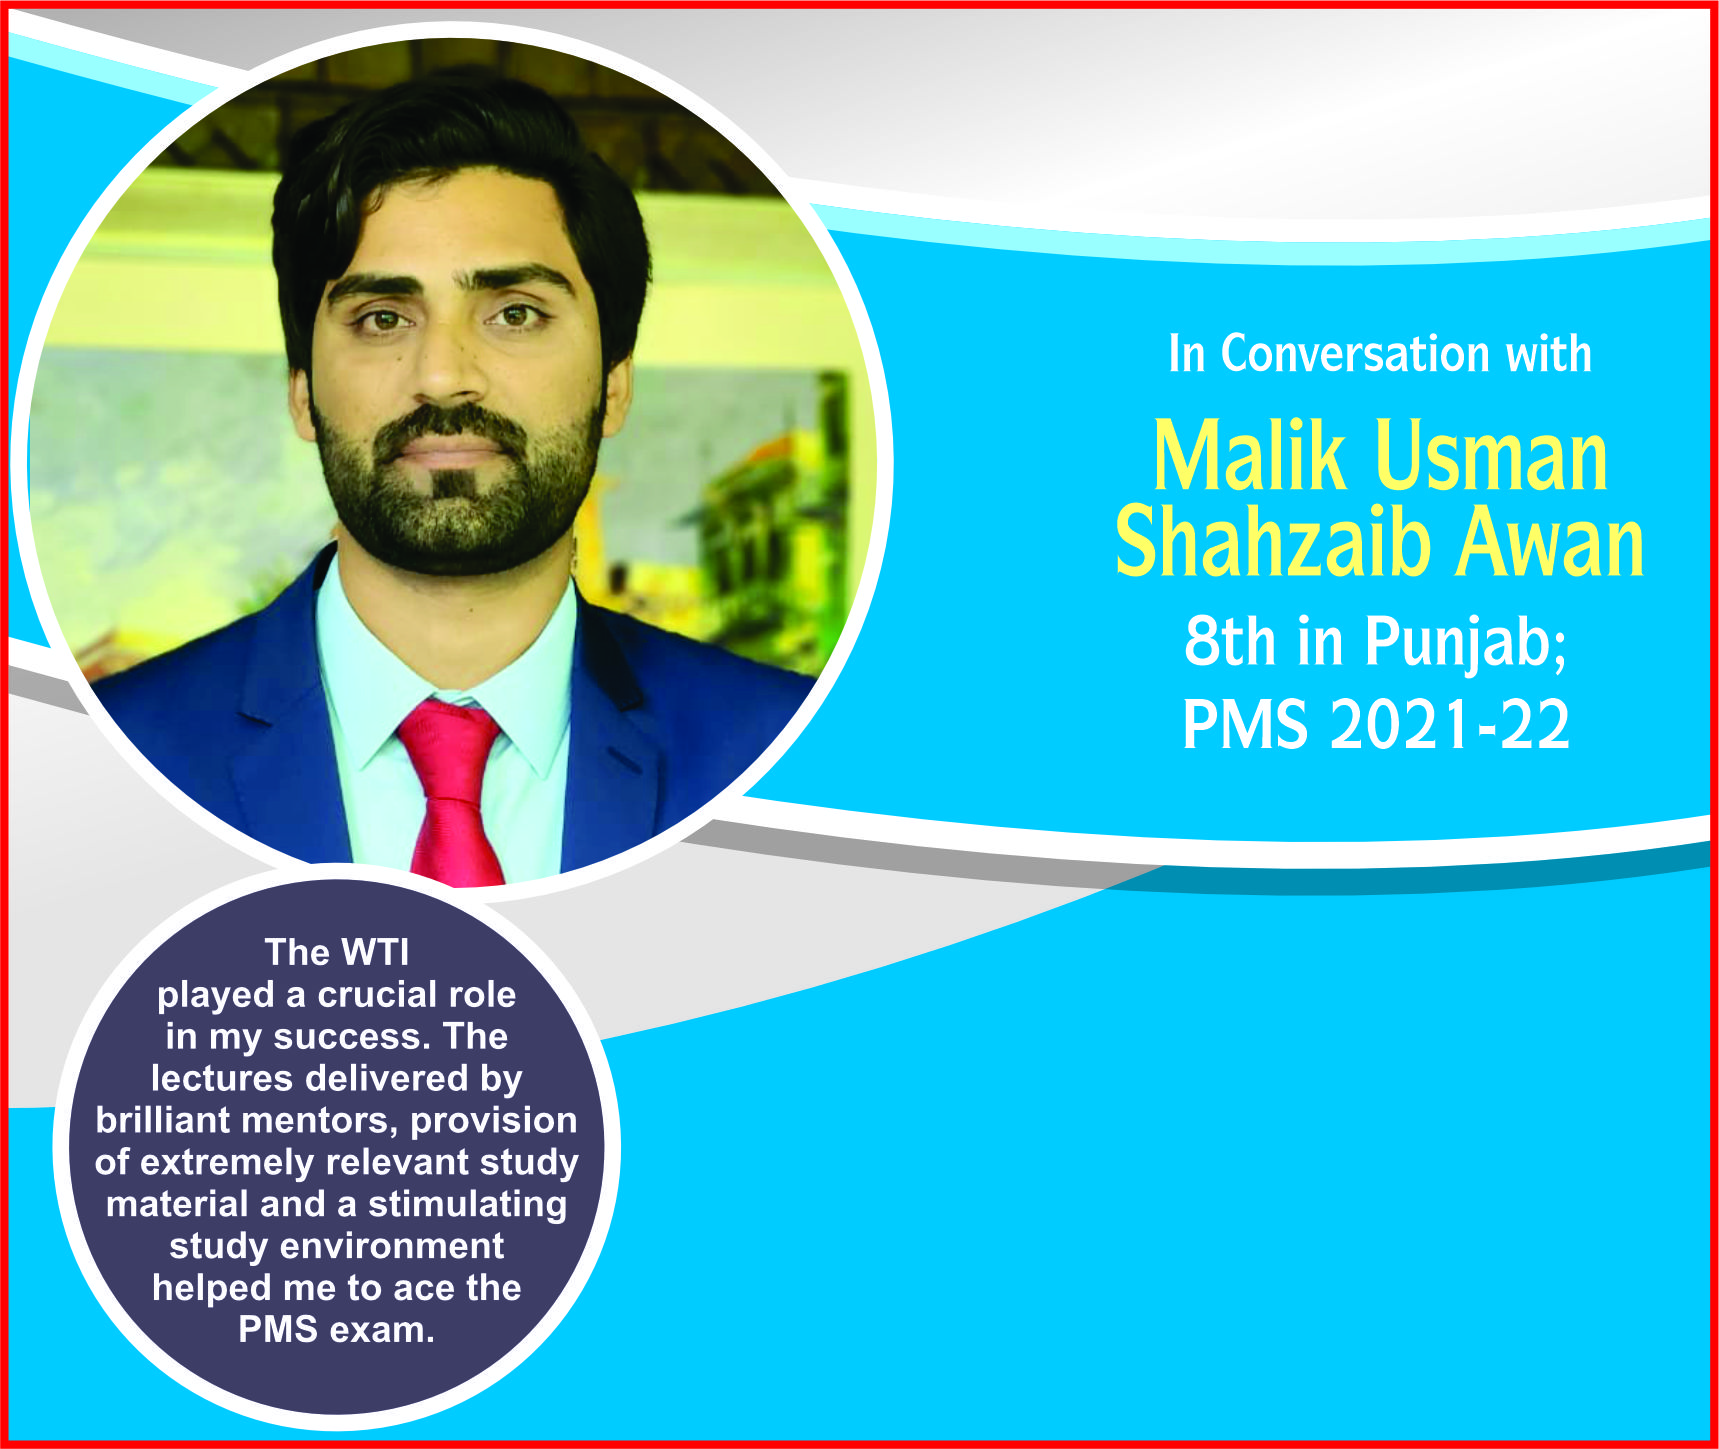 You are currently viewing In Conversation with Malik Usman Shahzaib Awan